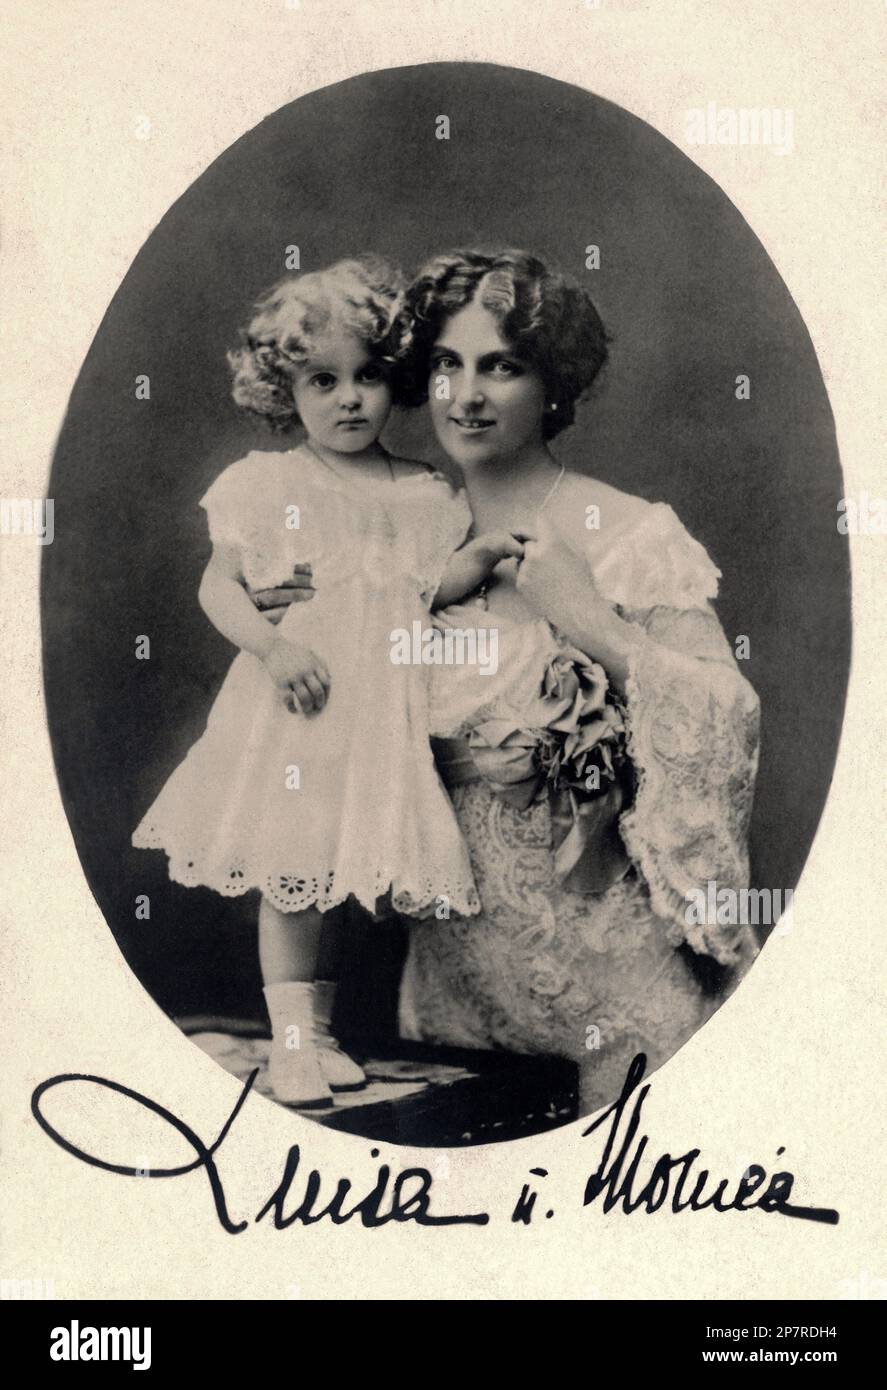 1905 , GERMANY : The scandalous prinzessin zu Sachsen  LUISA VON TOSCANA ( Luise , Louise von Österreich - Toskana  ,  1870 – 1947  ) with daugther ANNA MONIKA ( 1903 - 1976, later married firstly Joseph Franz, Archduke of Austria and secondly Reginald Kazanjian ) . Married with Friedrich August III von Sachsen ( Frederick Augustus , 1865 - 1932 ), with him have 7 sons . Princess Imperial and Archduchess of Austria, Princess of Tuscany, Hungary and Bohemia was a daughter of Ferdinand IV of Tuscany and his second wife Alicia of Parma, daughter of Duke Charles III and Louise of Berry . On 9 Dece Stock Photo